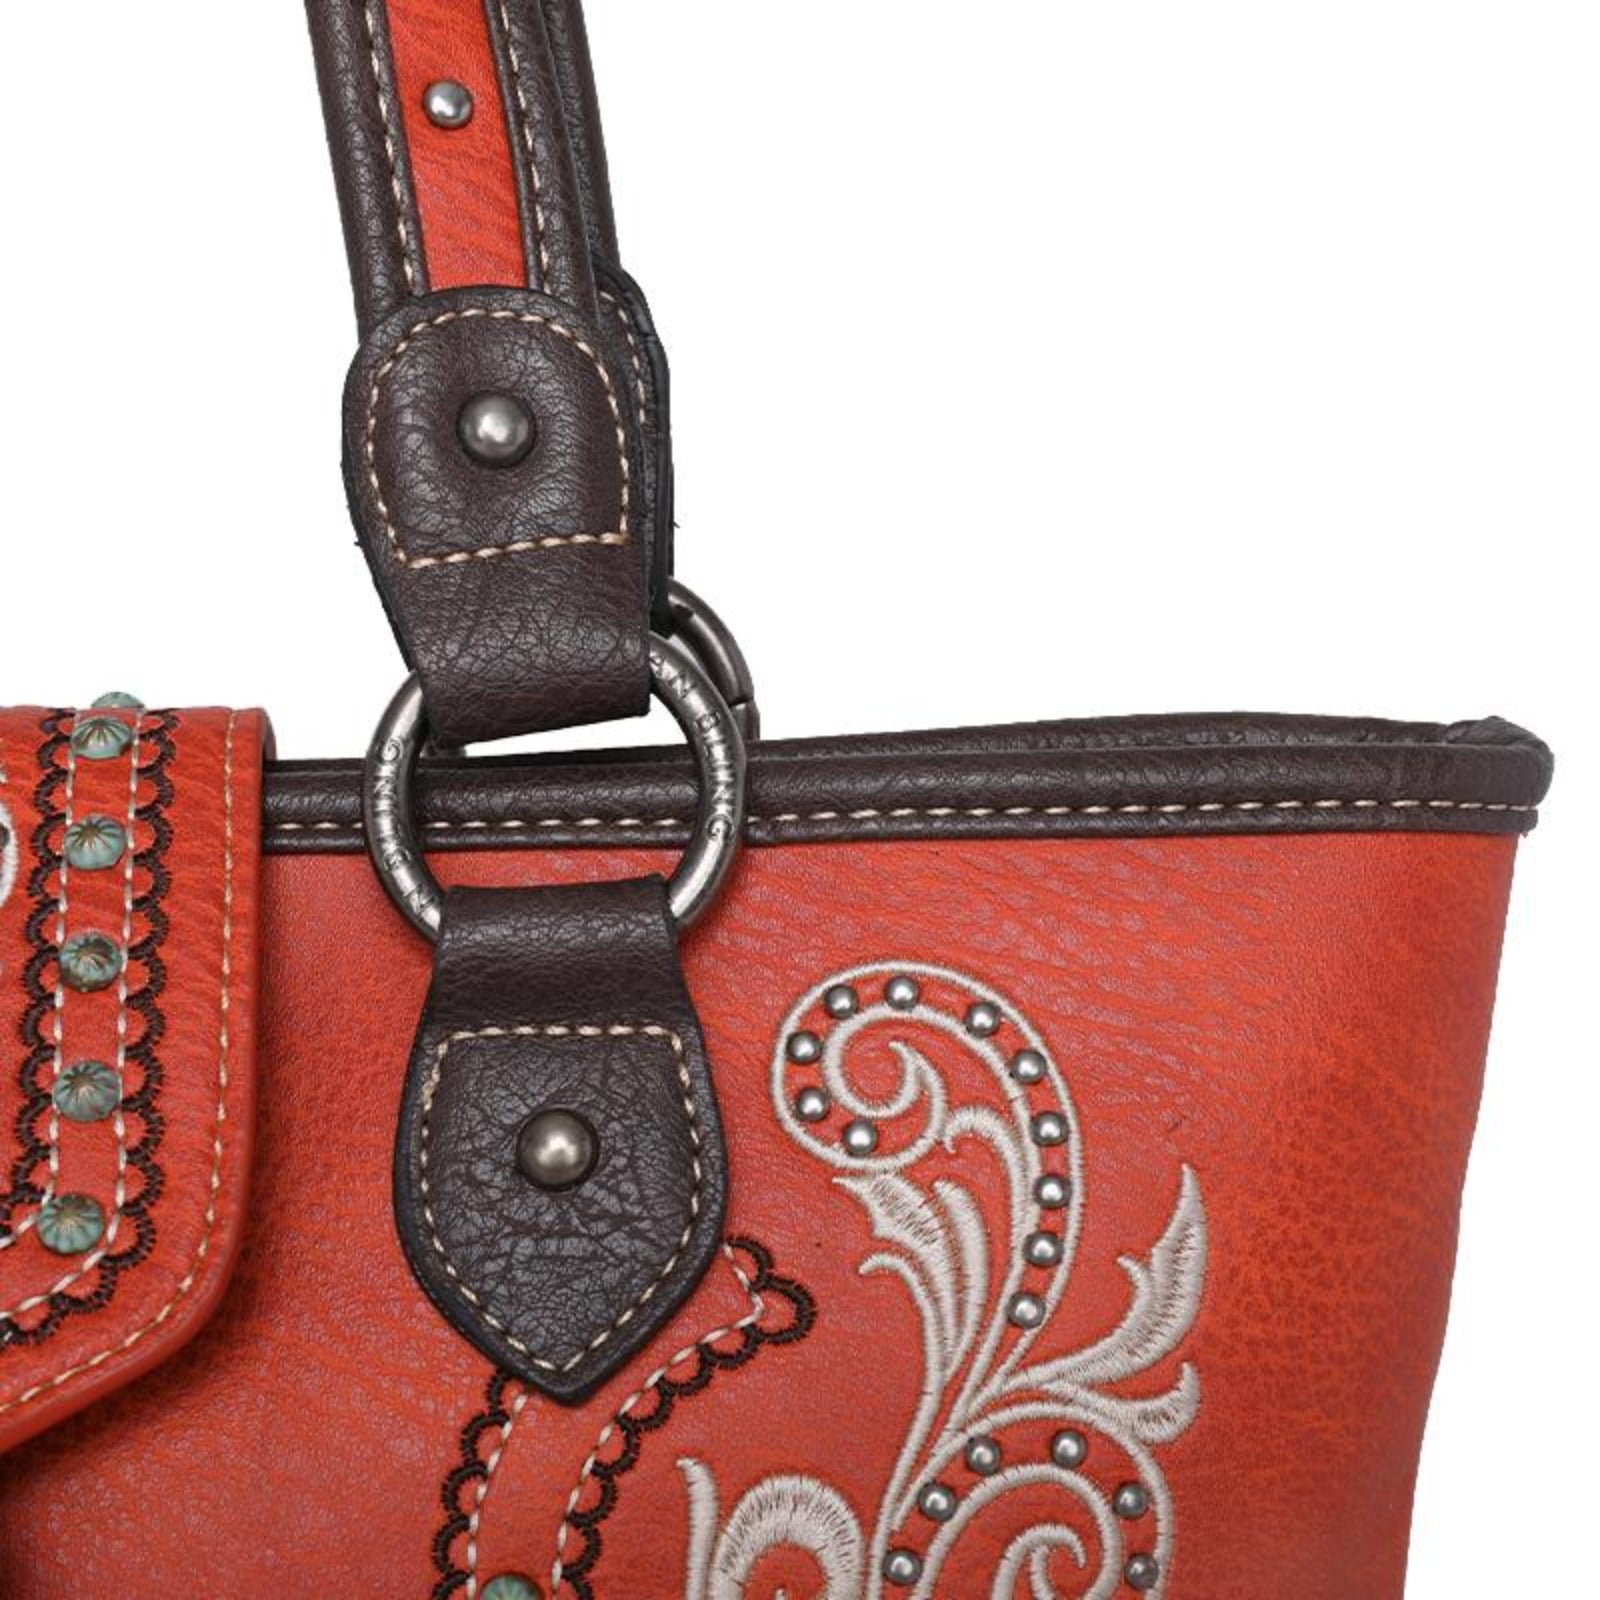 American Bling Buckle Collections Concealed Carry Tote with Zippered-Around Long Wallet - Cowgirl Wear